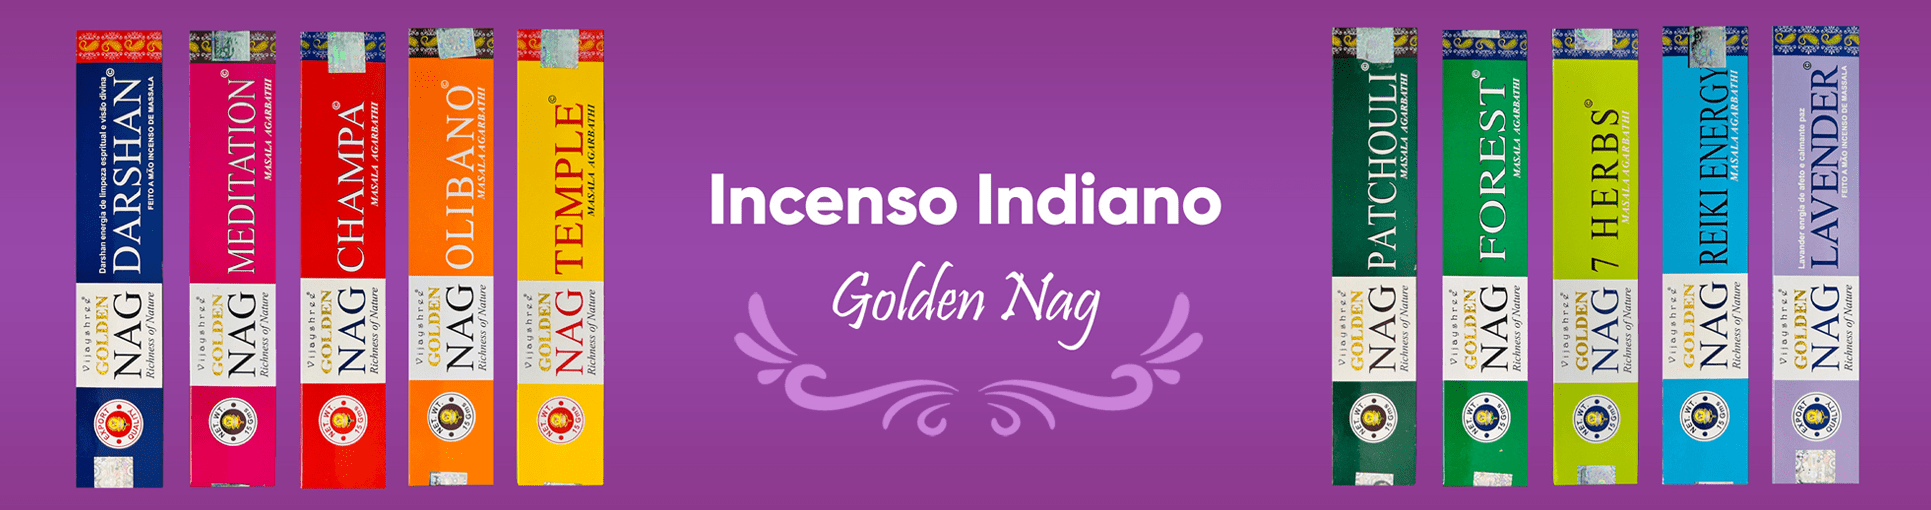 Incenso Indiano Golden Nag